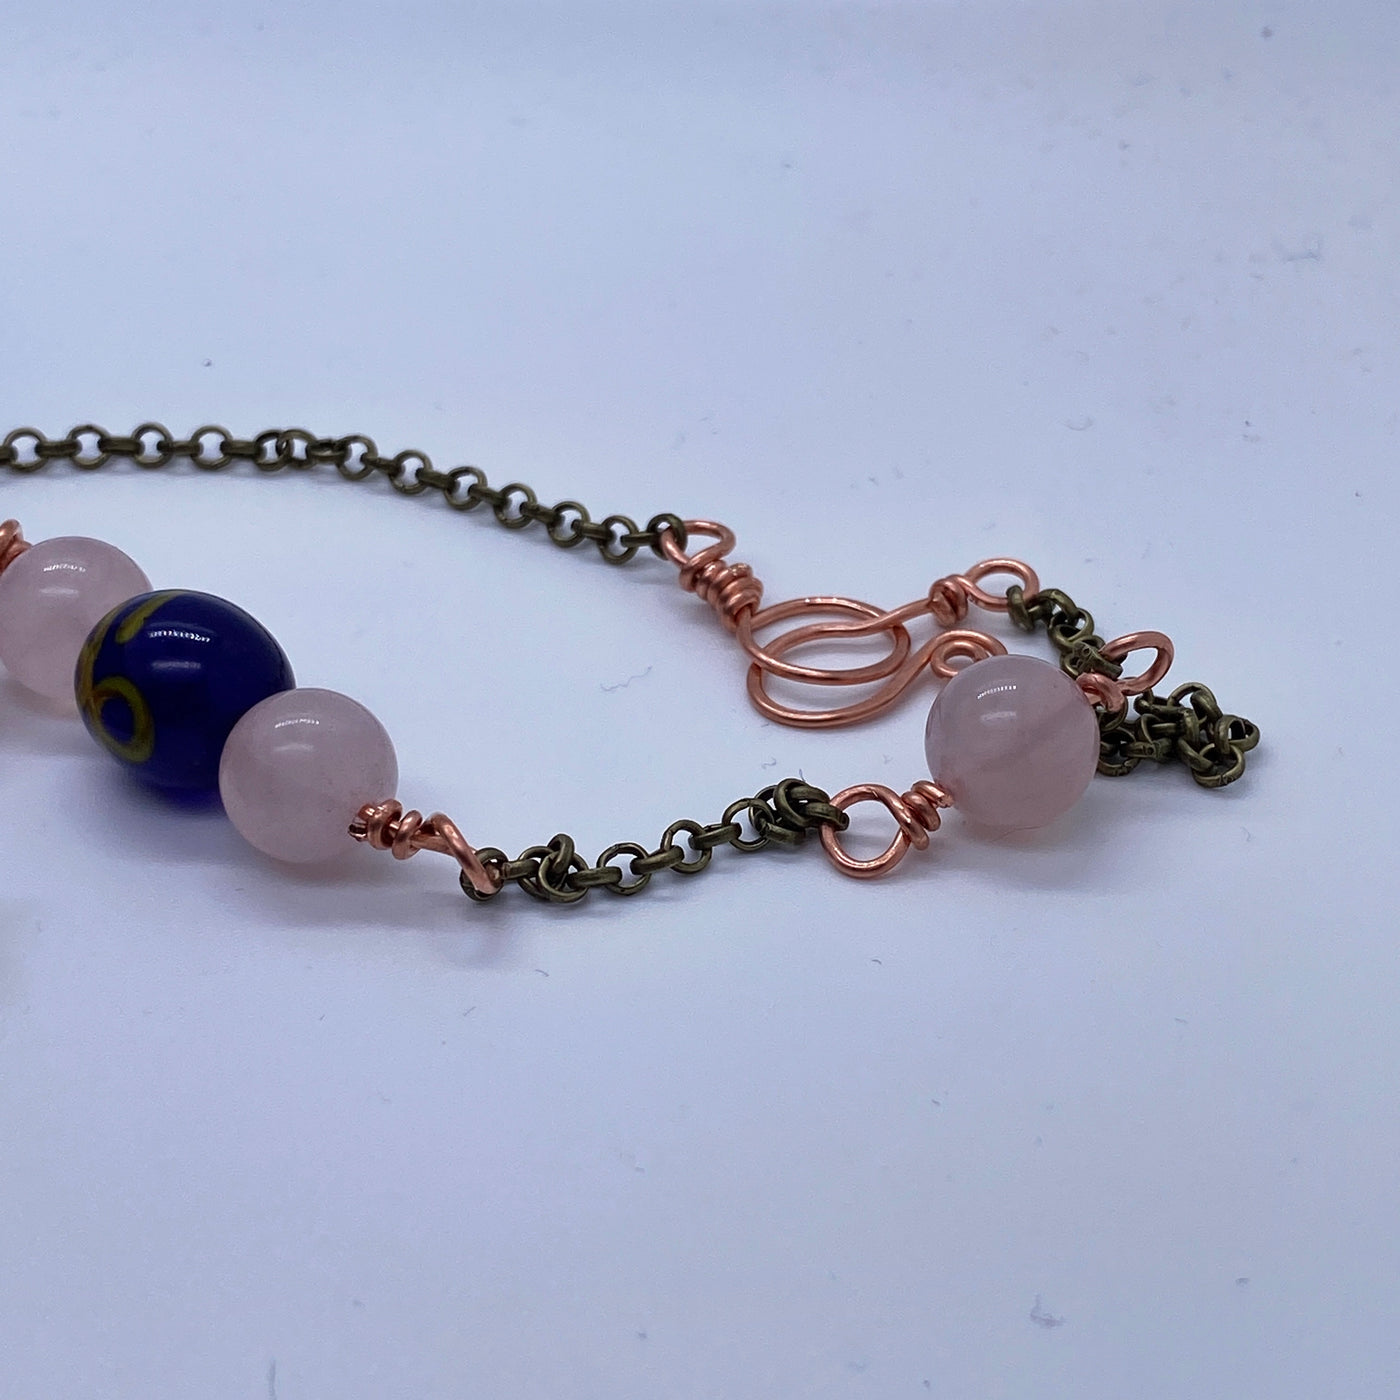 Hand inlaid/Wound Java glass and rose quartz on chain necklace